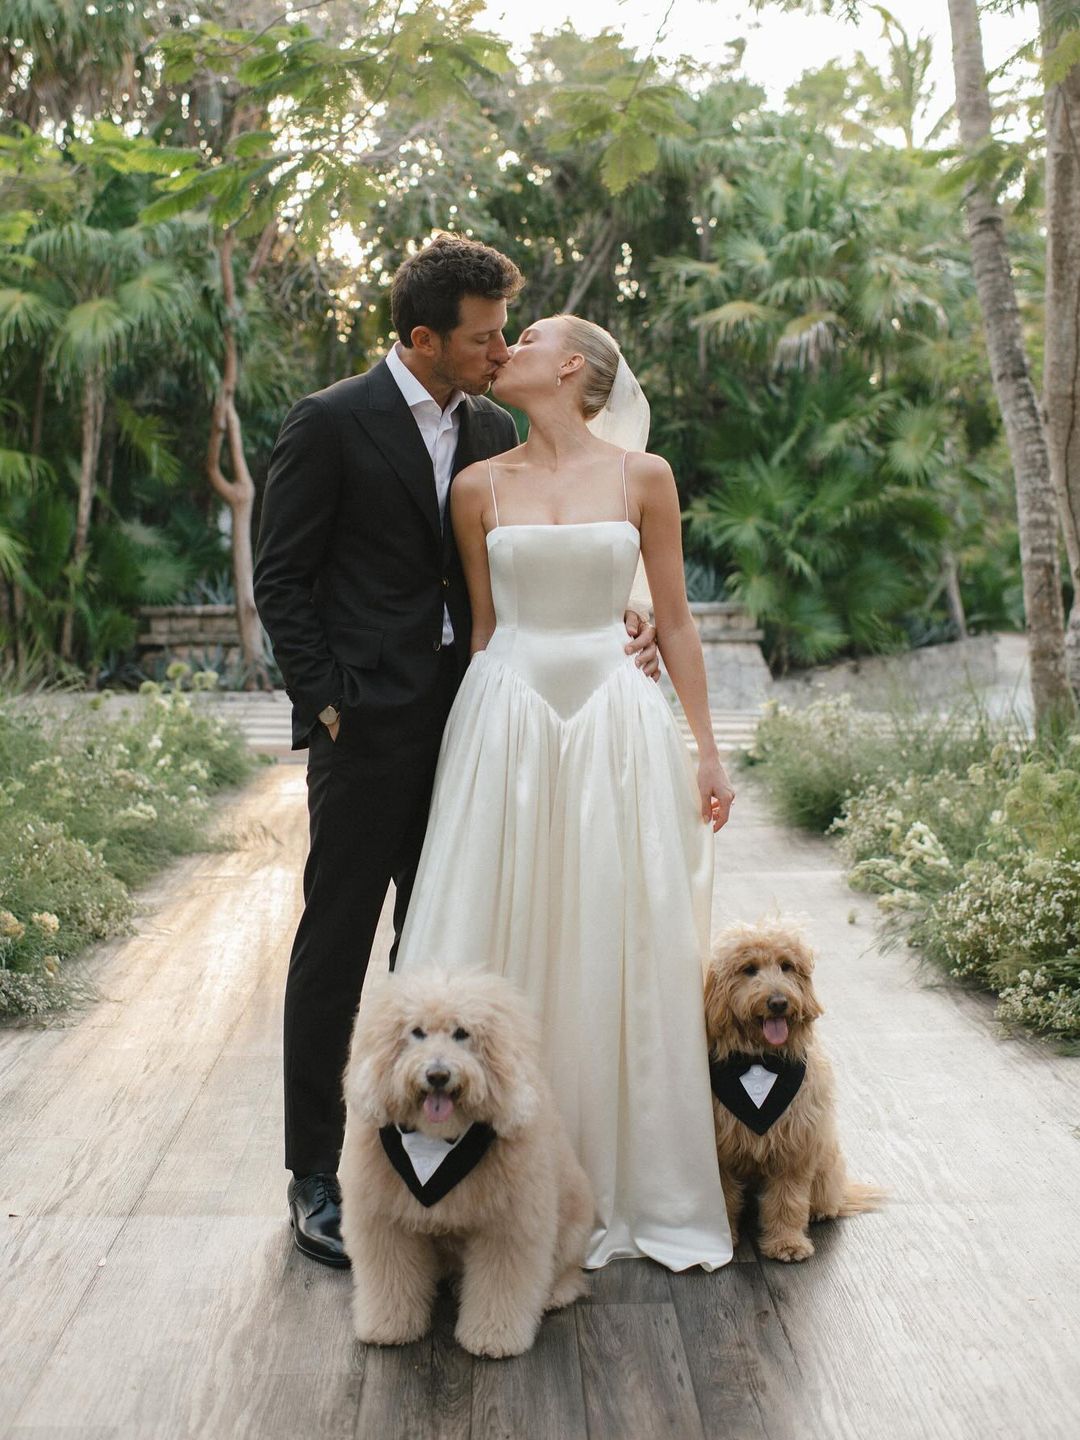  Alex Cooper and Matt Kaplan pose on their wedding day with their dogs